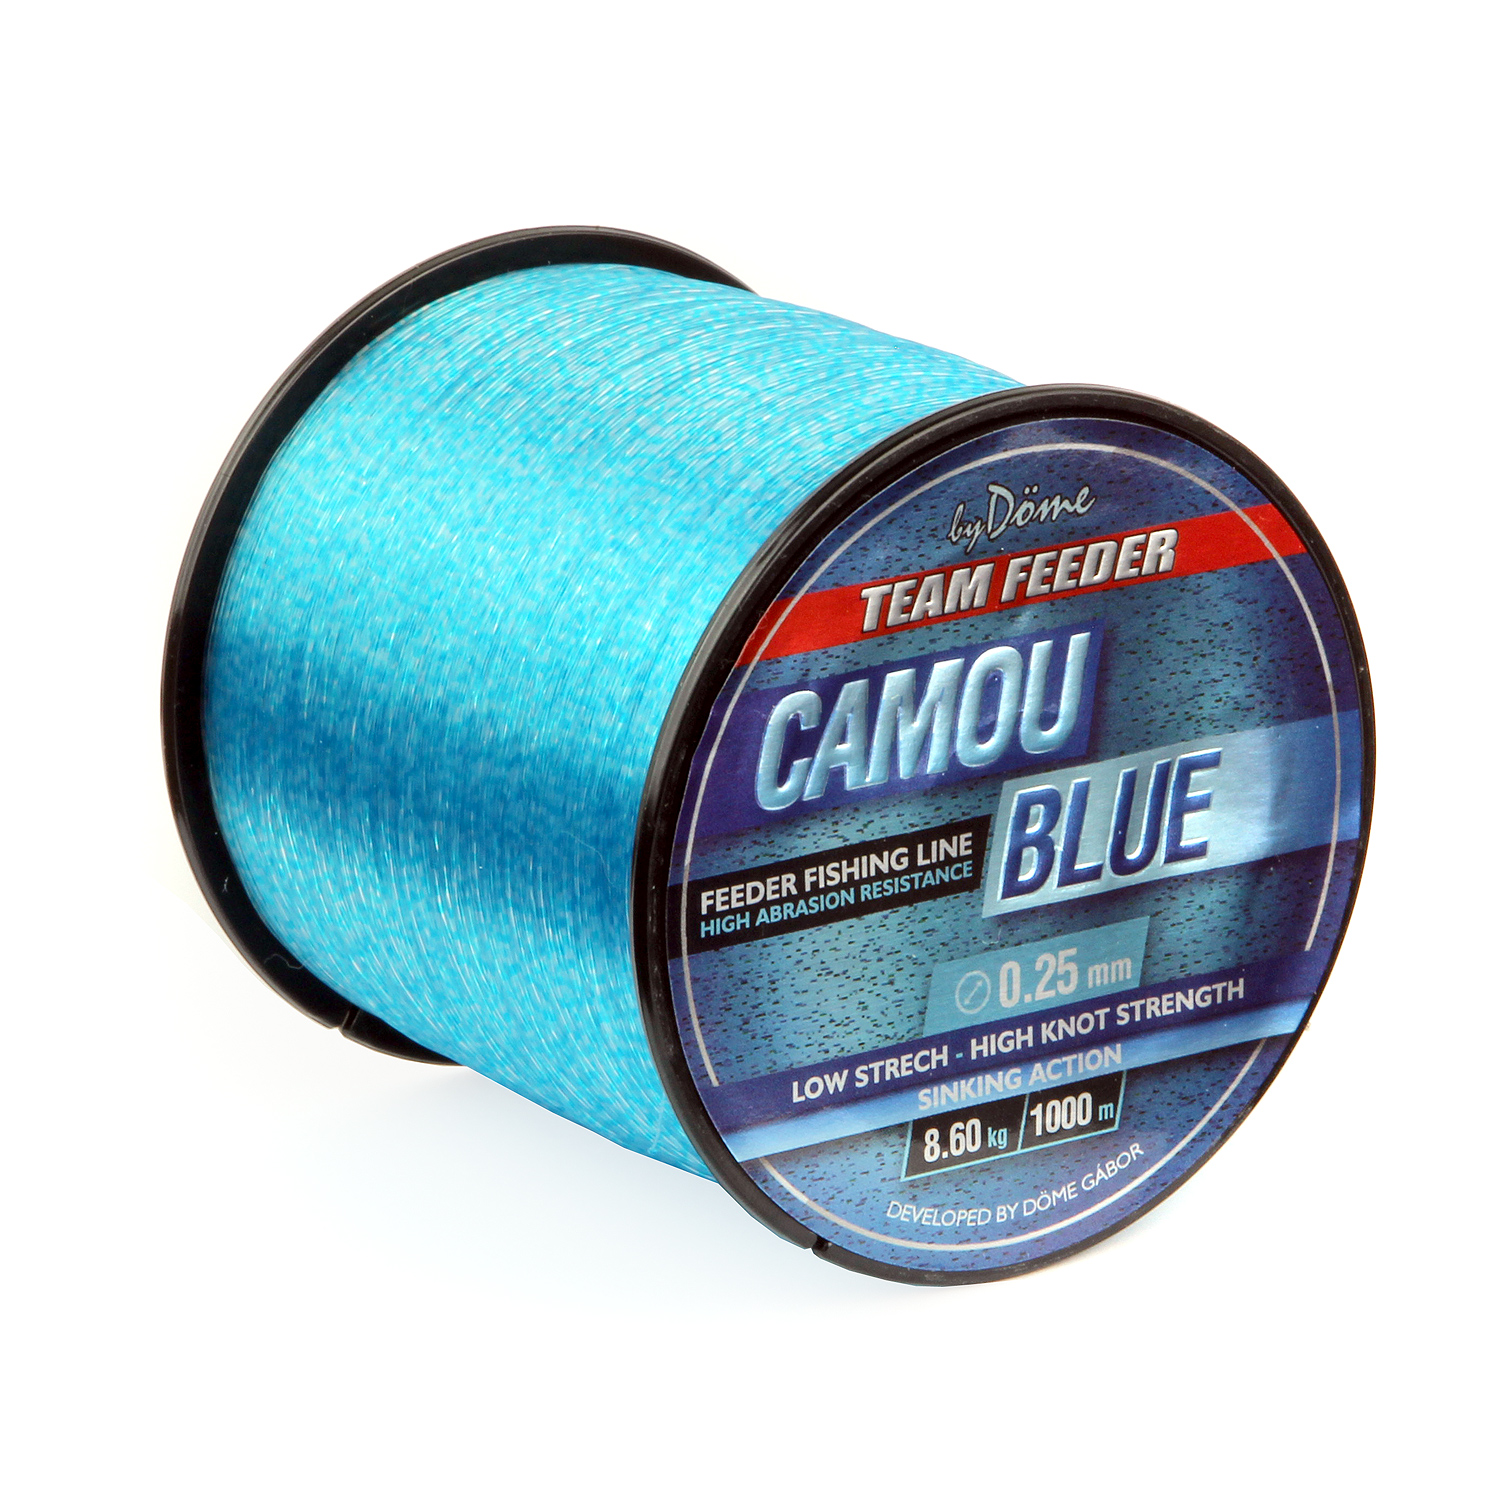 By Dme TF Camou Blue 1000m 0.22mm